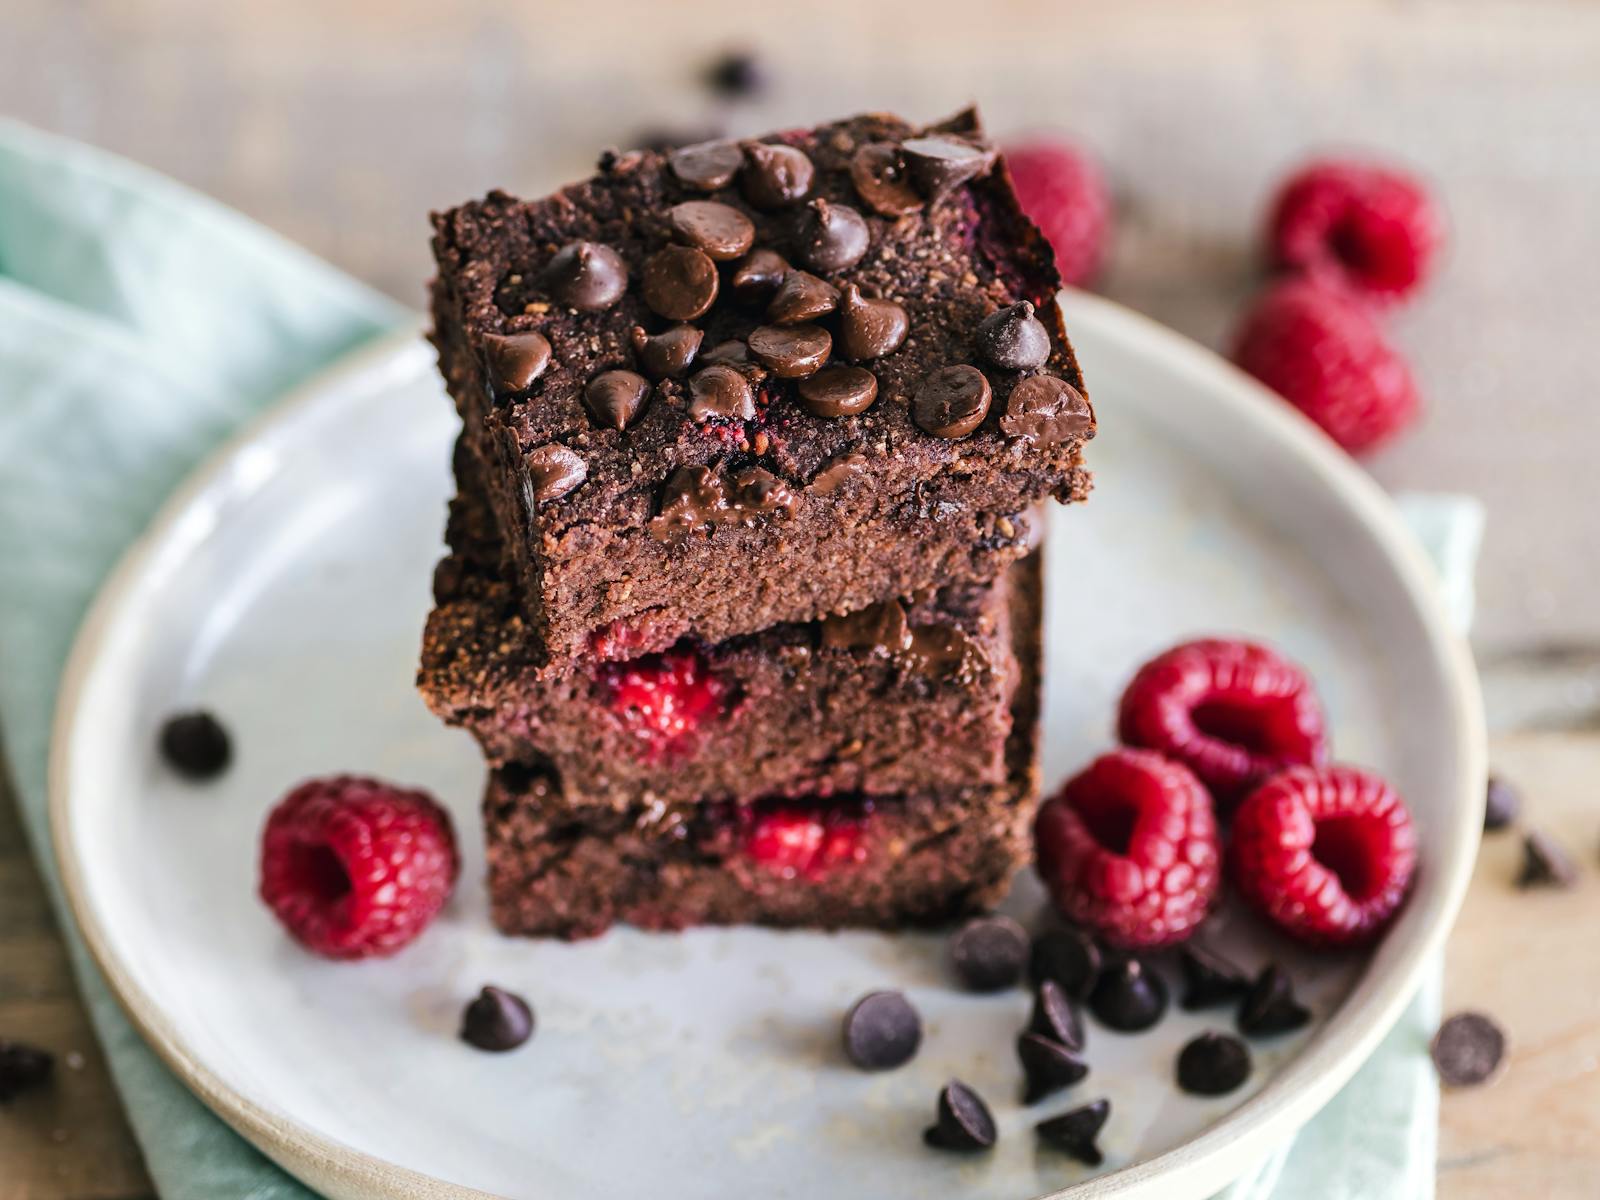 This easy brownie recipe from Simply Recipes is perfect for satisfying your sweet tooth. Rich, chocolatey and made in just 30 minutes.